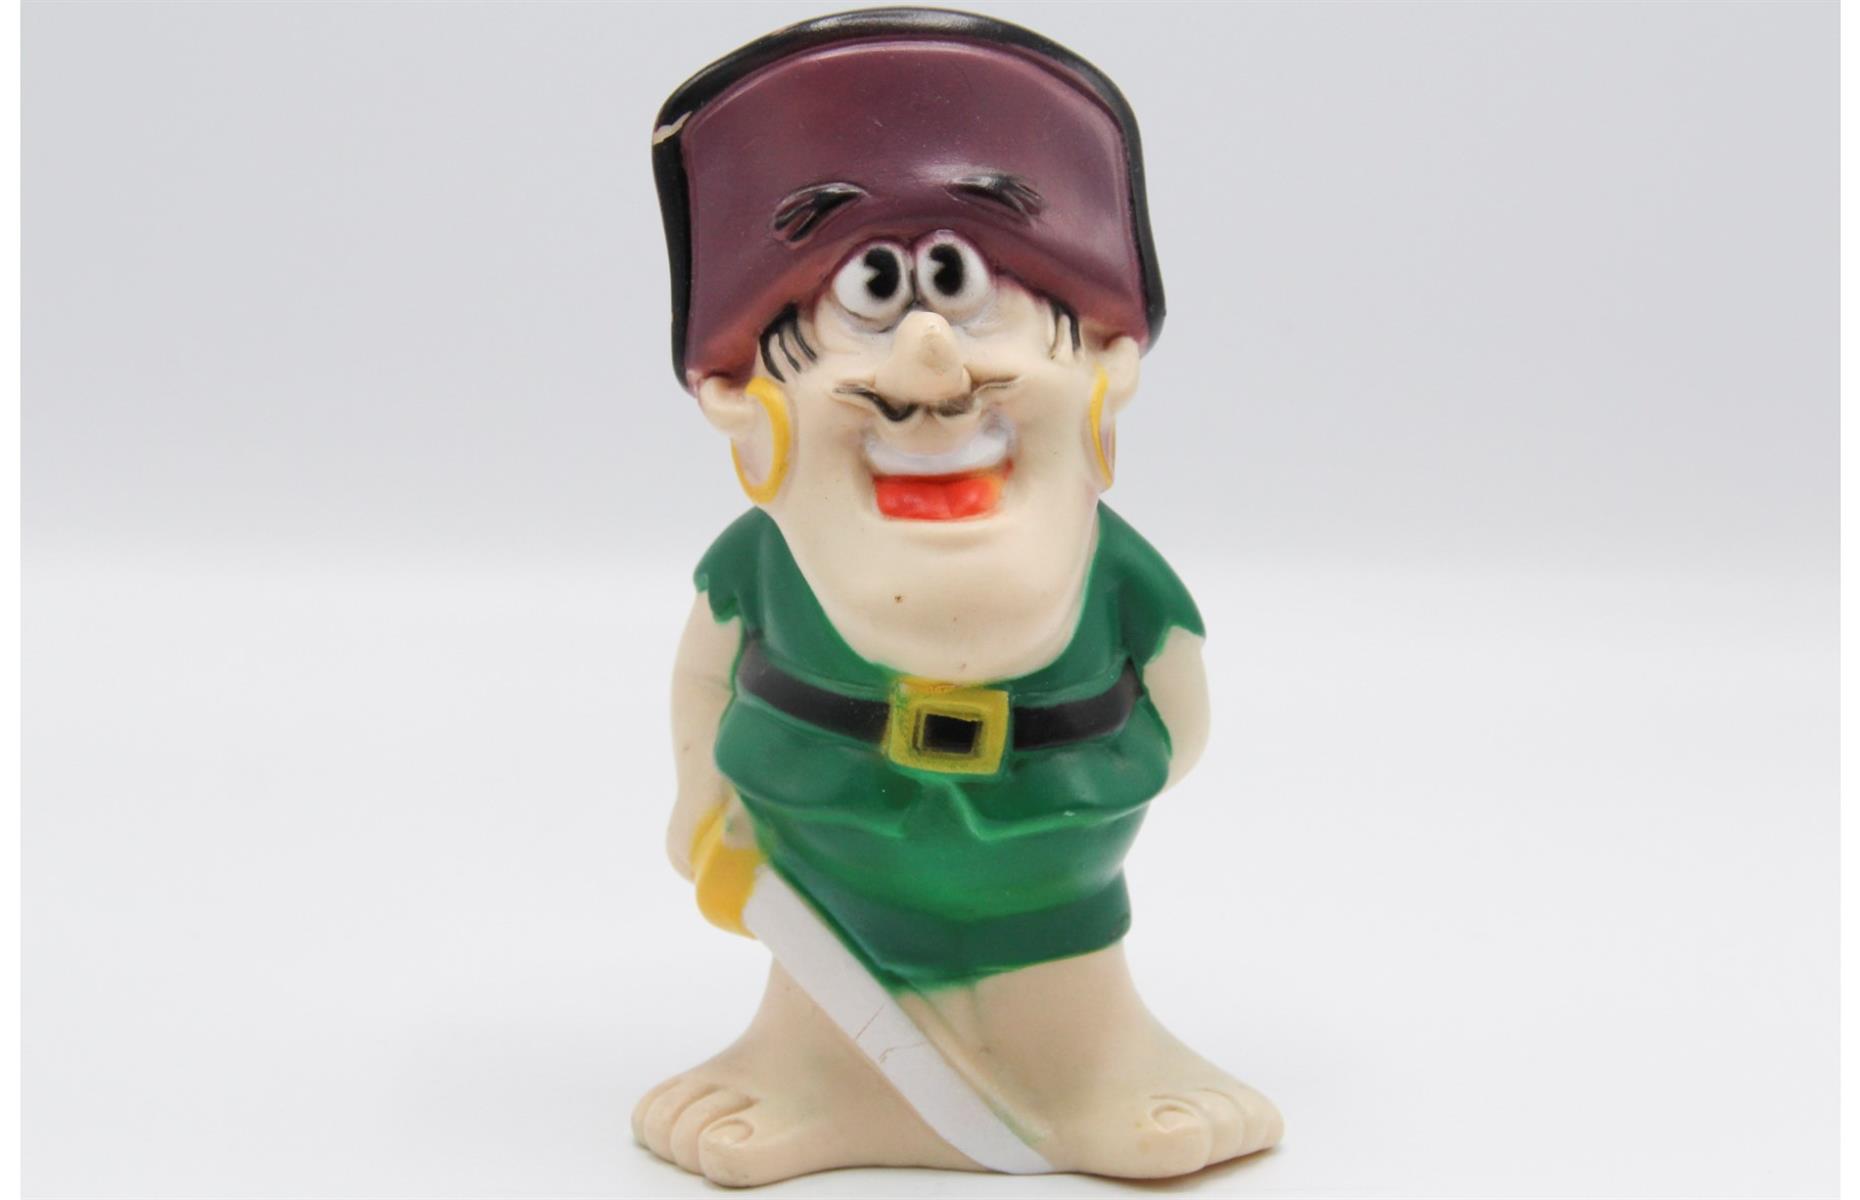 Quaker Cap'n Crunch Cereal Jean LaFoote coin bank: up to $100 (£82)